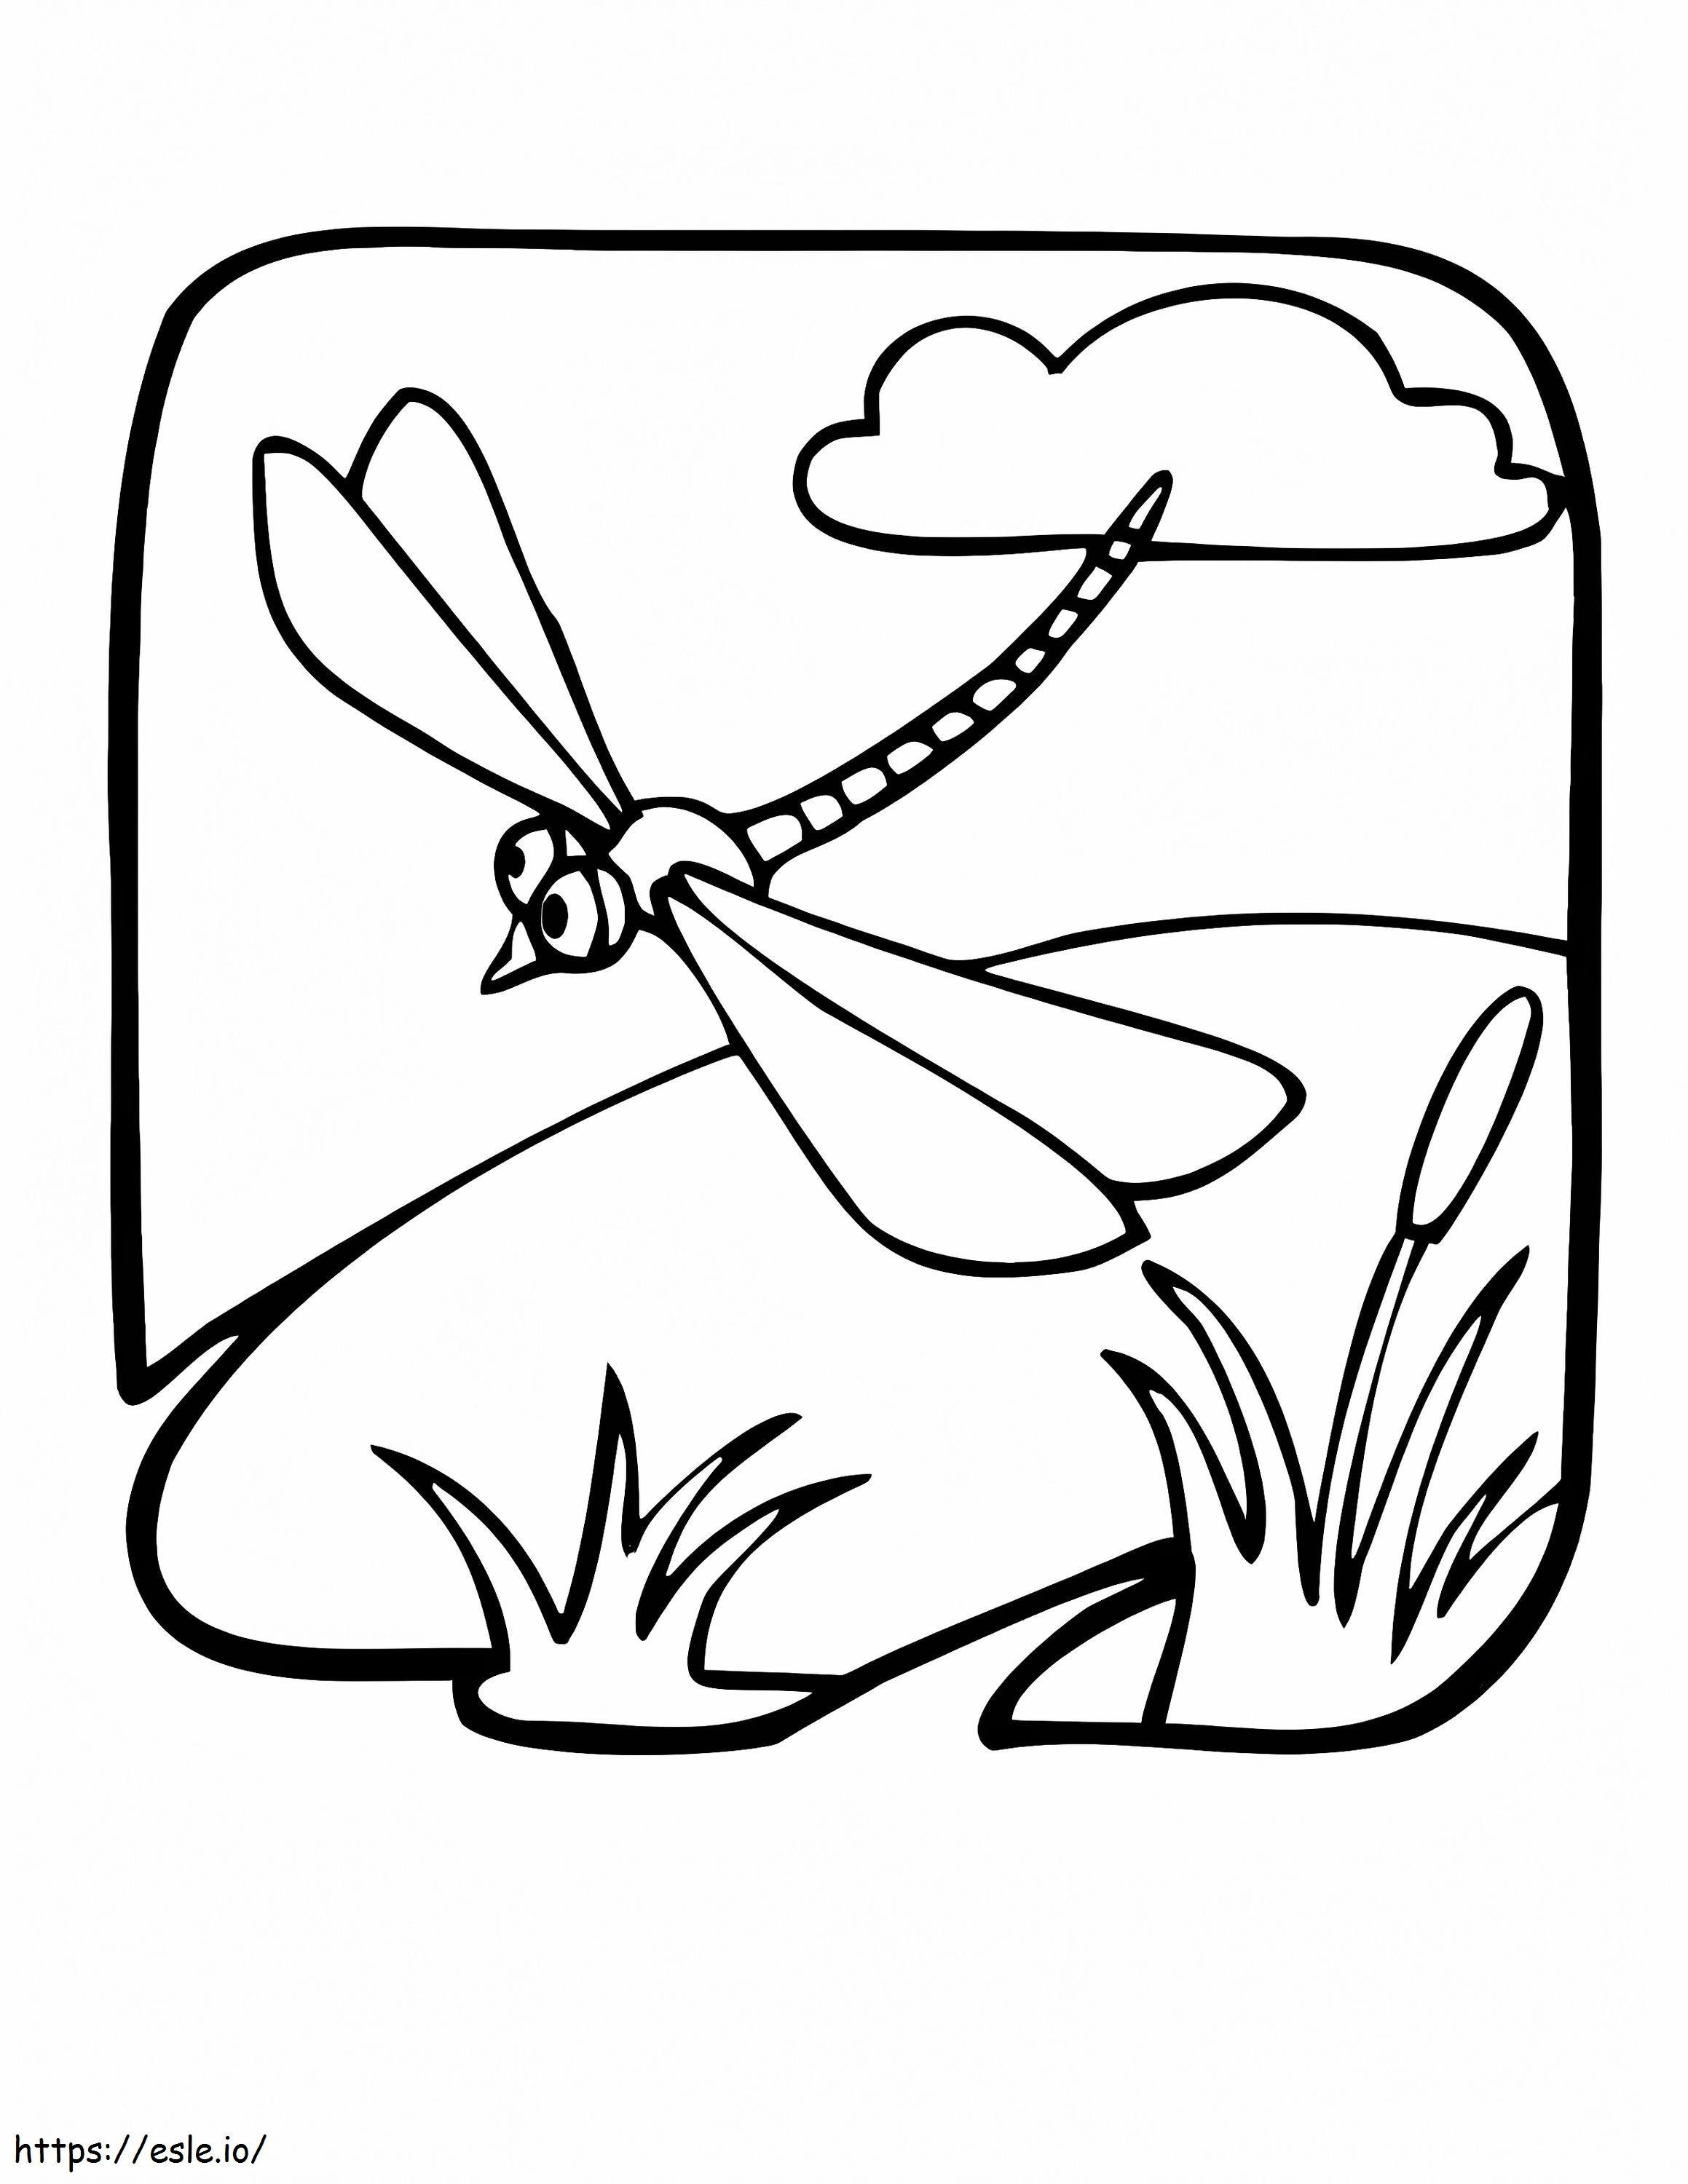 Dragonfly Is Flying coloring page